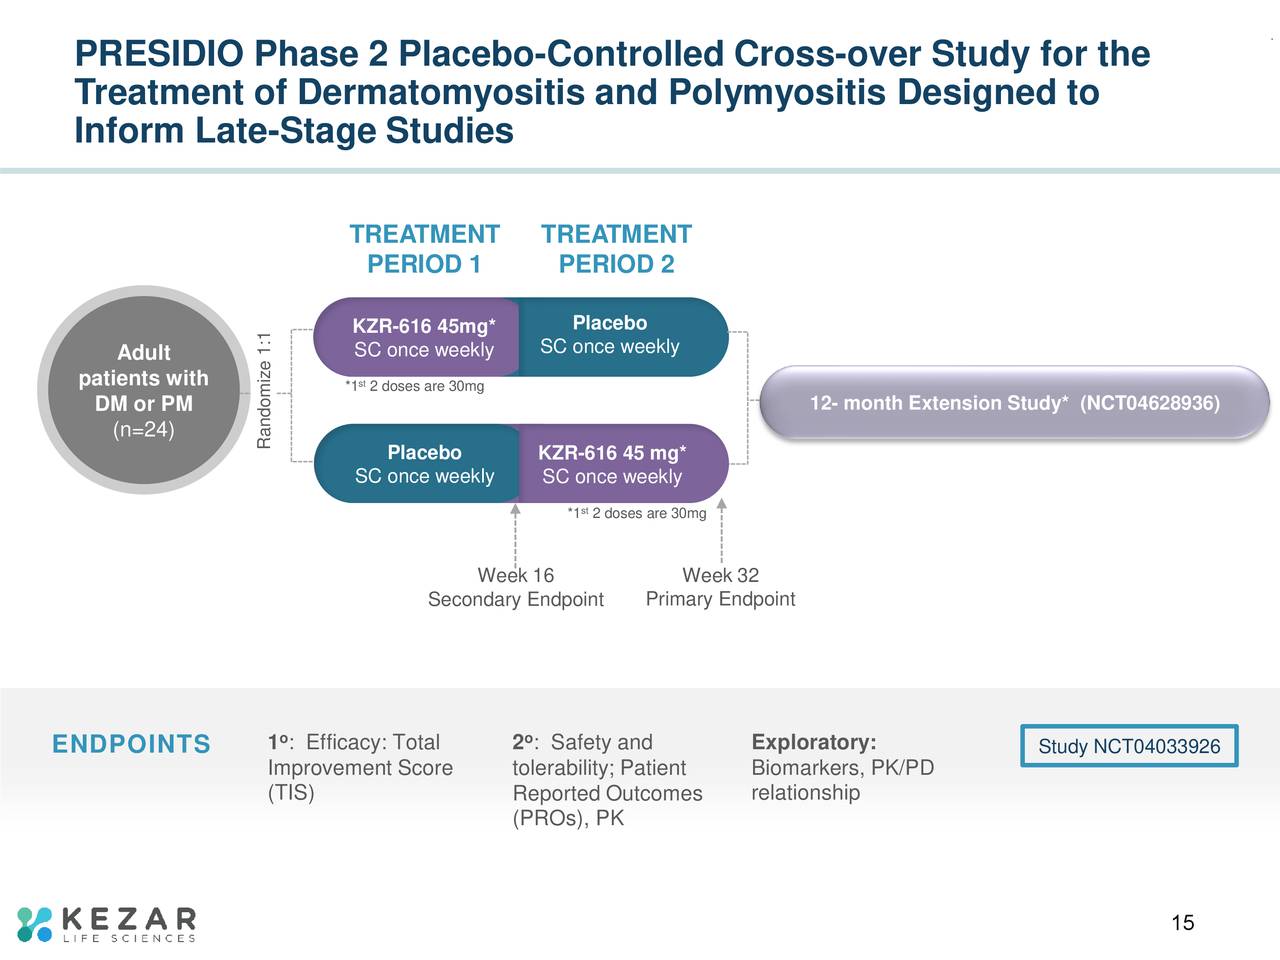 PRESIDIO Phase 2 Placebo-Controlled Cross-over Study for the